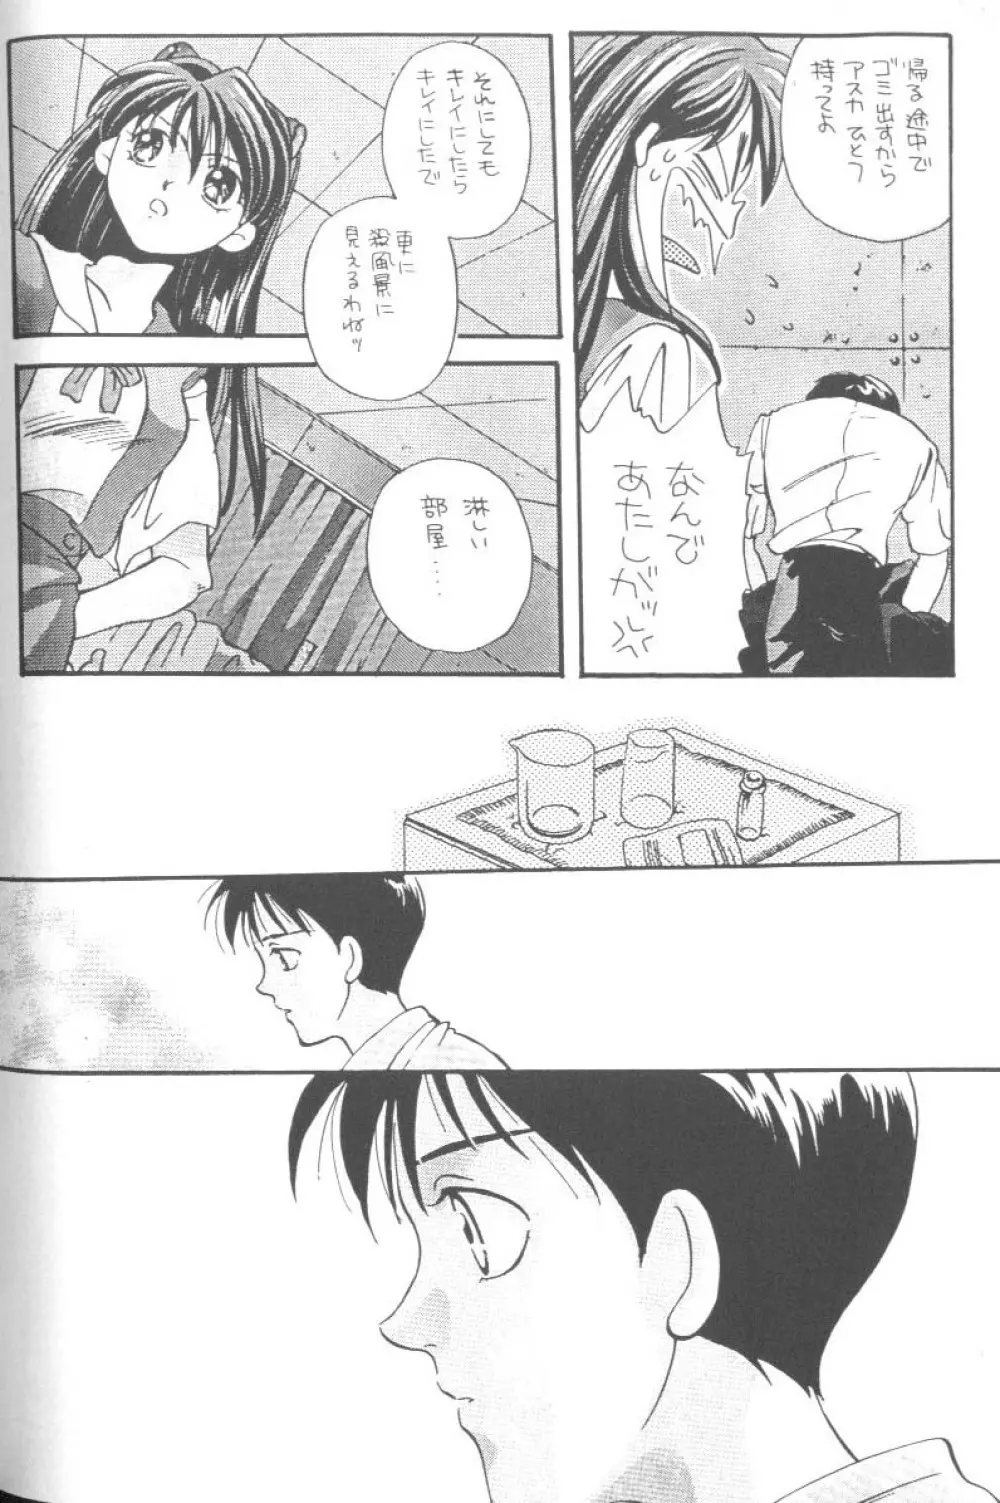 From The Neon Genesis 02 70ページ